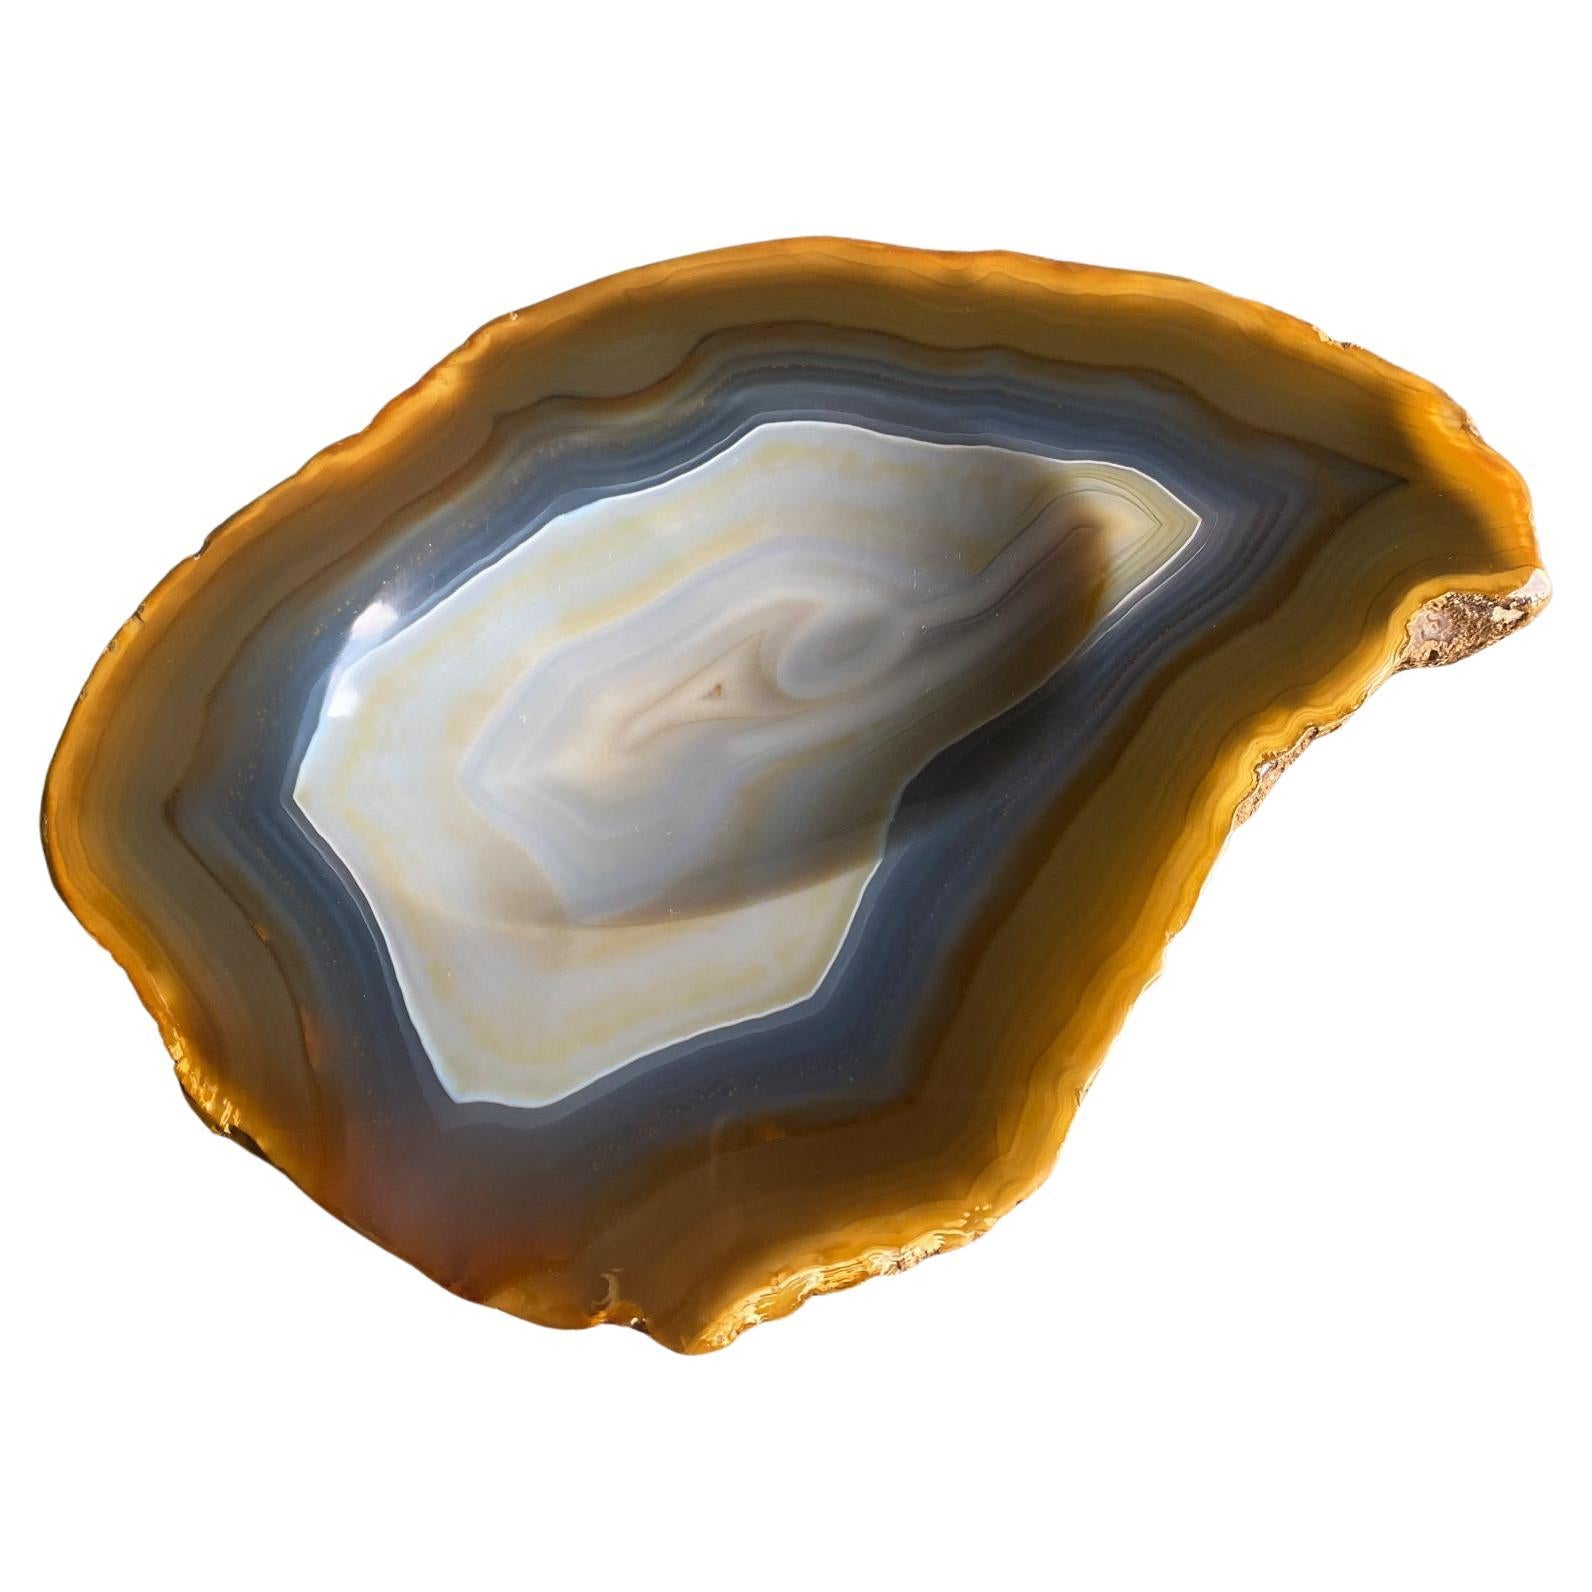 Polished Agate Geode Stone Bowl, circa 1960 For Sale